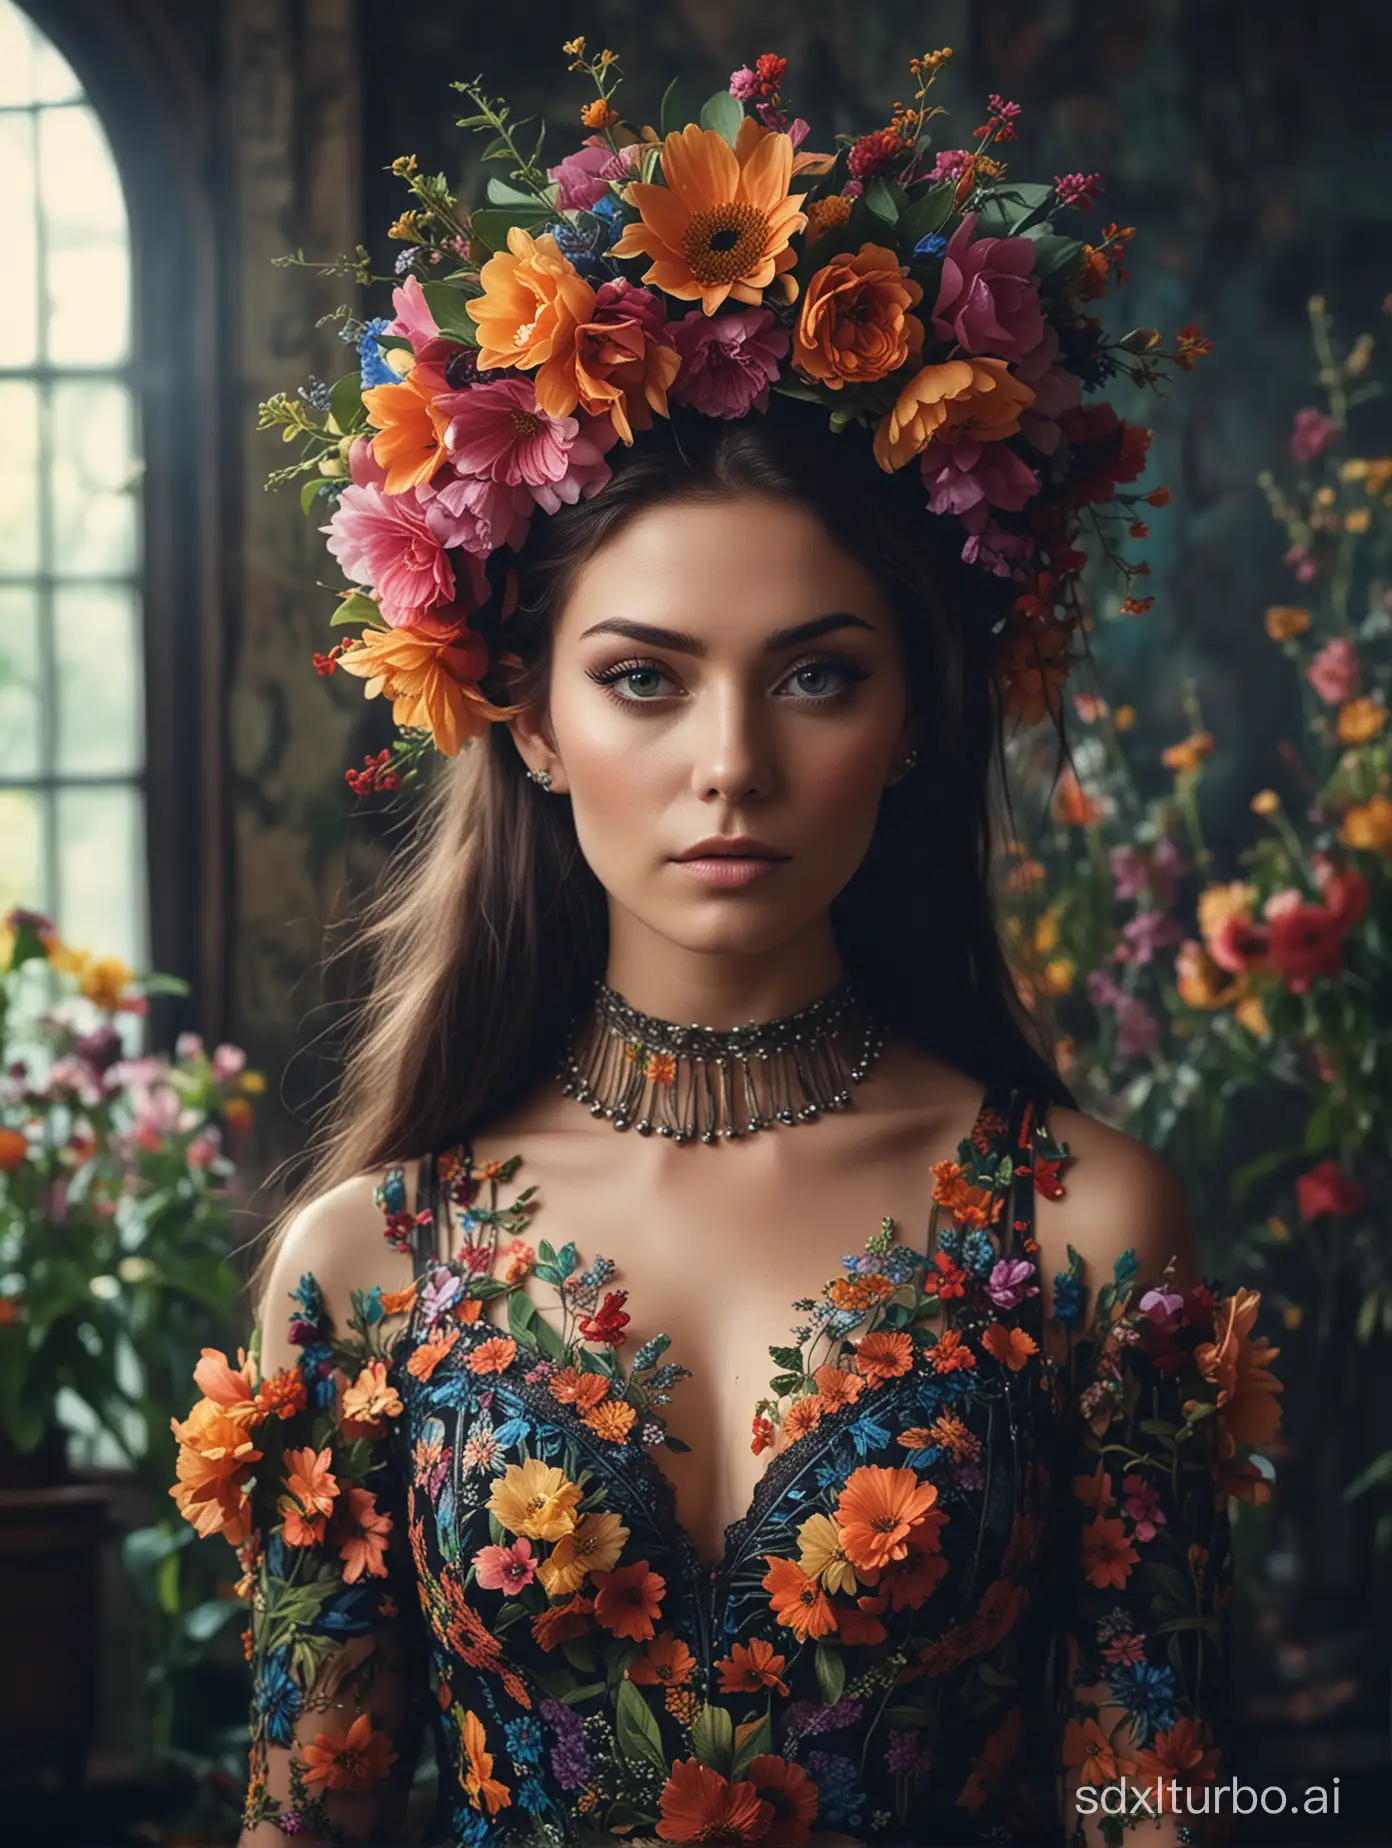 A striking photo of a Flowerpunk woman wearing a captivating headpiece adorned with colorful flowers and plants, creating a natural, organic look. Her eyes are accentuated with a dark eyeliner, and she wears a beautiful, intricately designed dress. The background reveals a dimly lit room with a soft, ethereal atmosphere, enhancing the mysterious and alluring aura of the Flowerpunk woman., photo